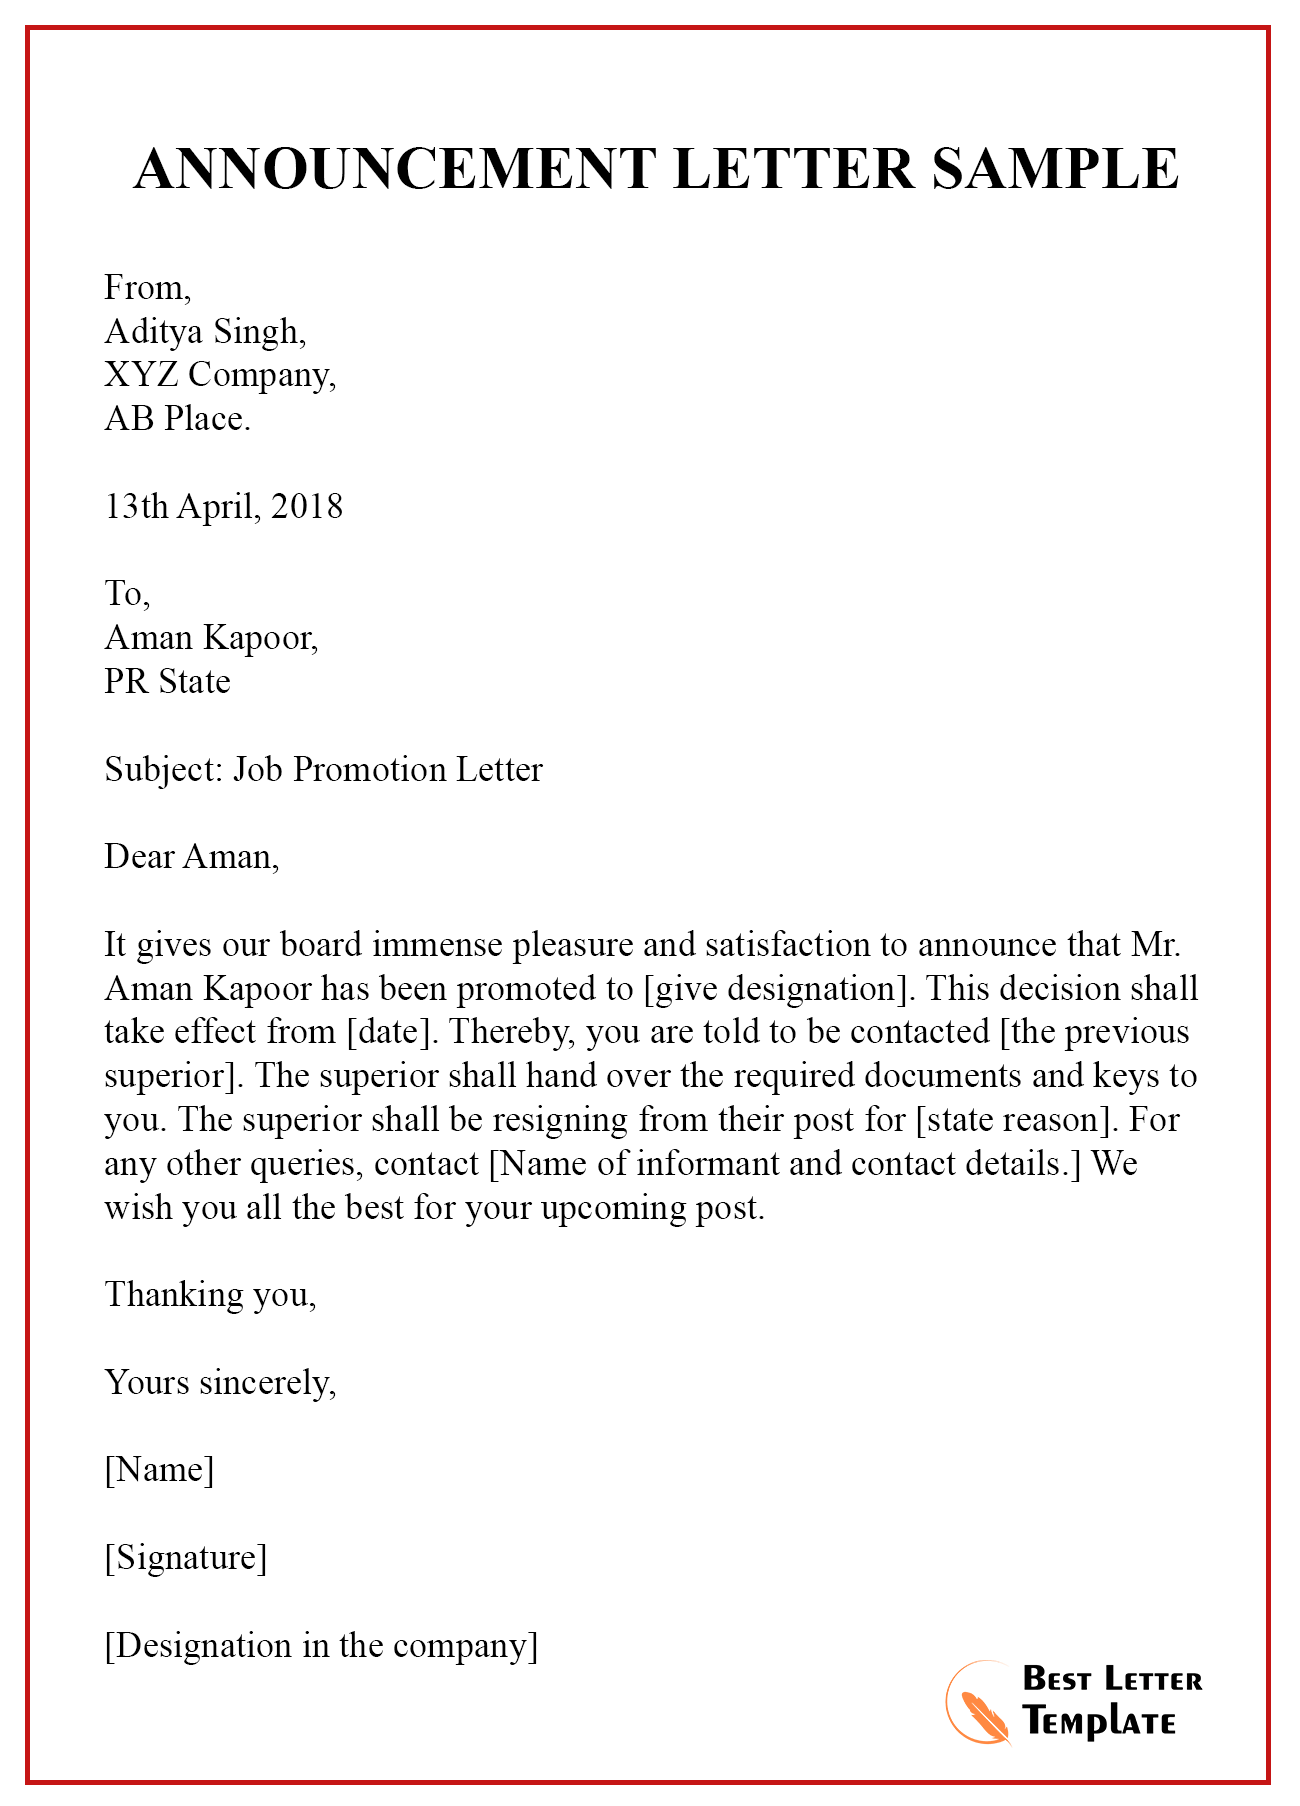 10-free-announcement-letter-template-format-sample-example